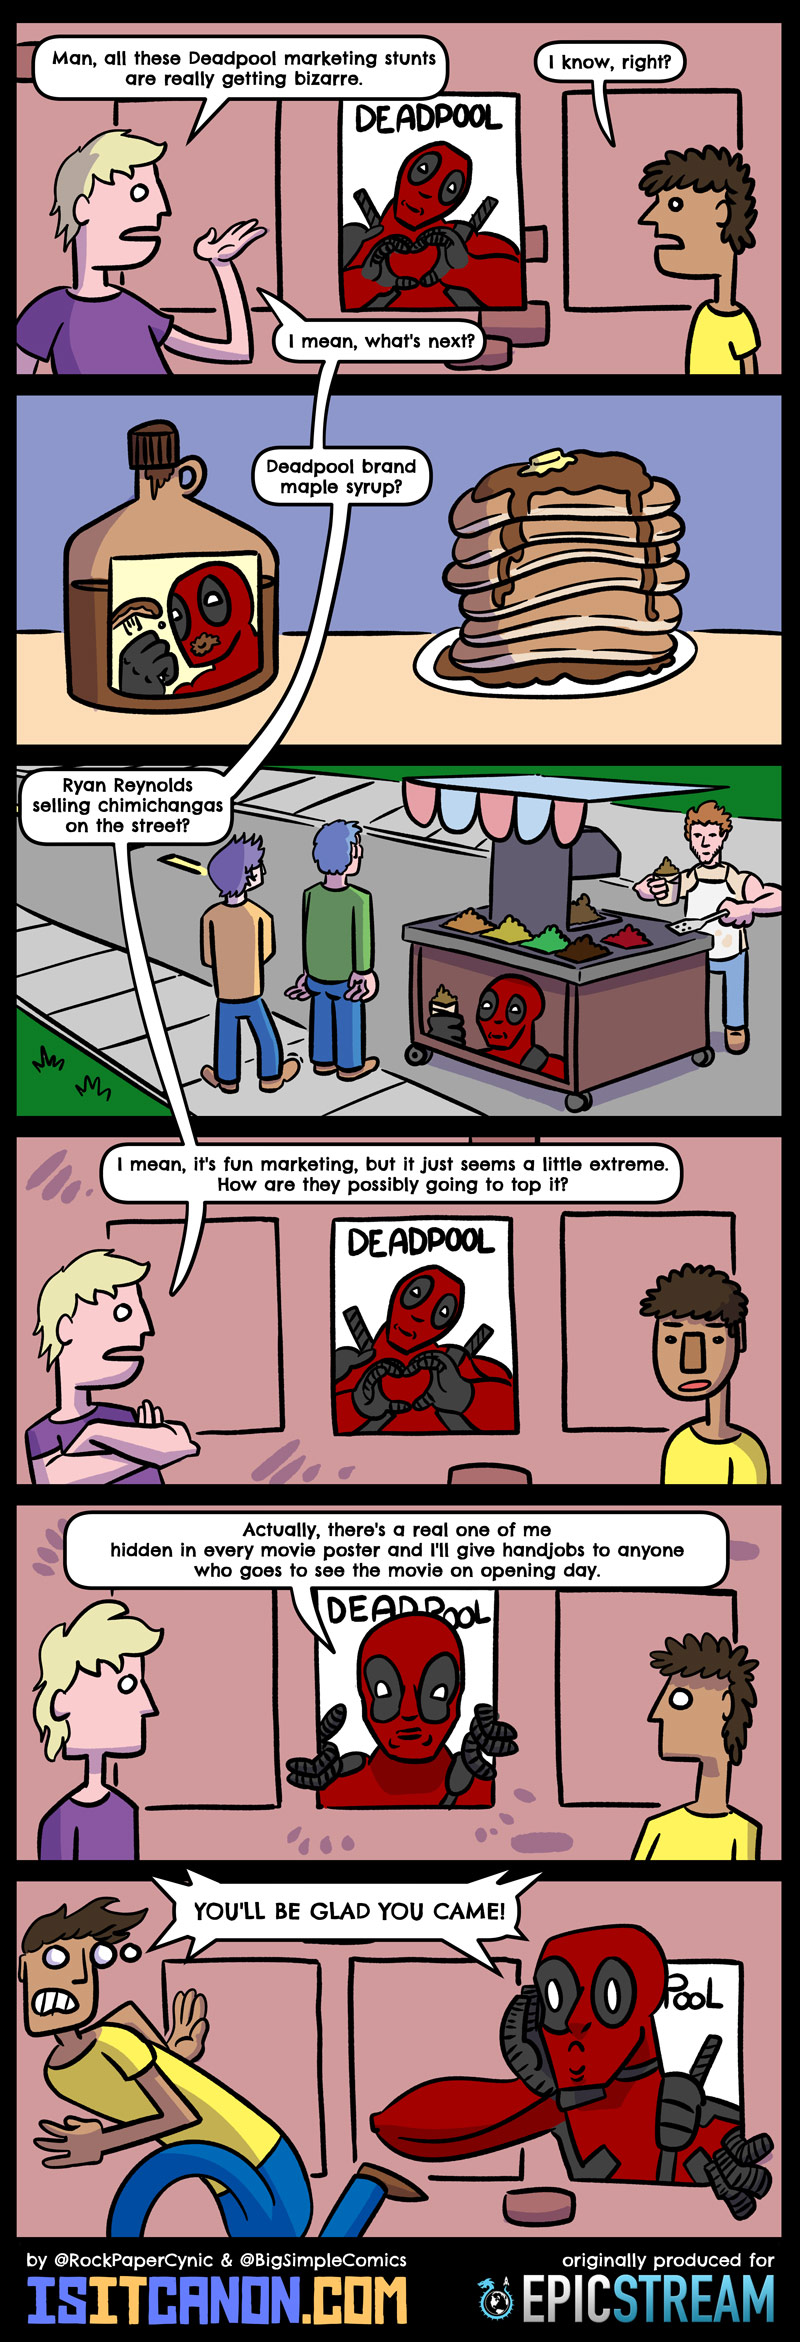 In this comic, we question how far Deadpool is willing to go with marketing his new movie